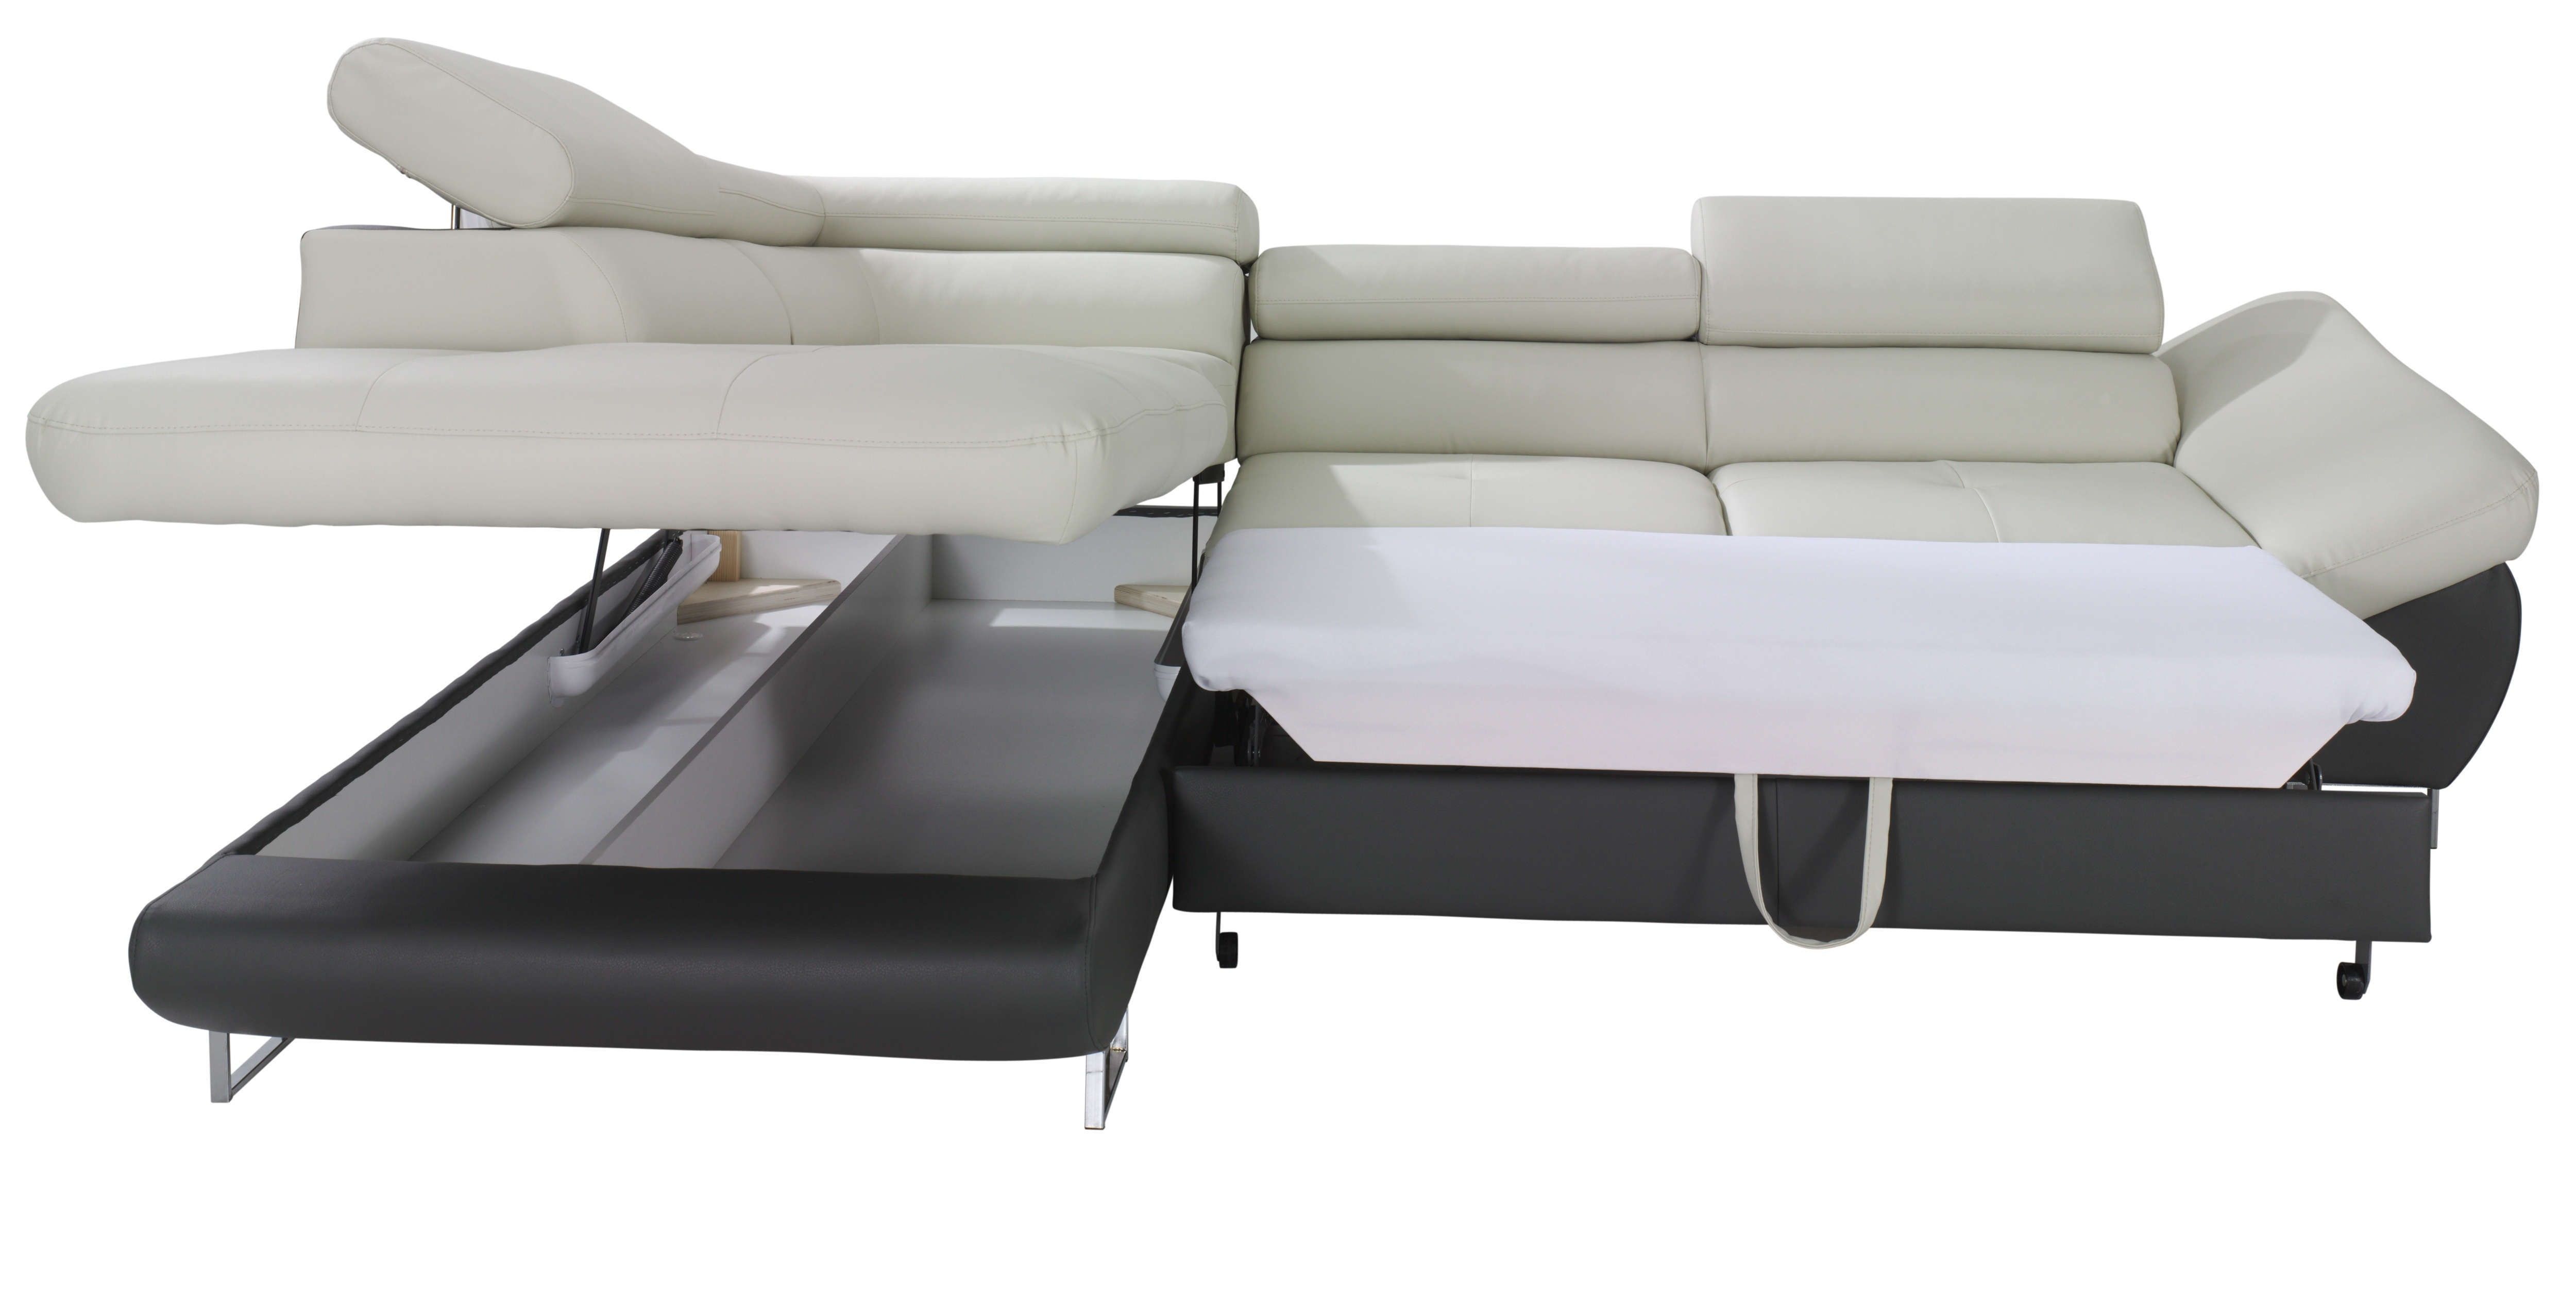 Modern Concept Sectional Sofas Nj With Sofa Bed Ido Furniture Inside Newfoundland Sectional Sofas (Photo 10 of 10)